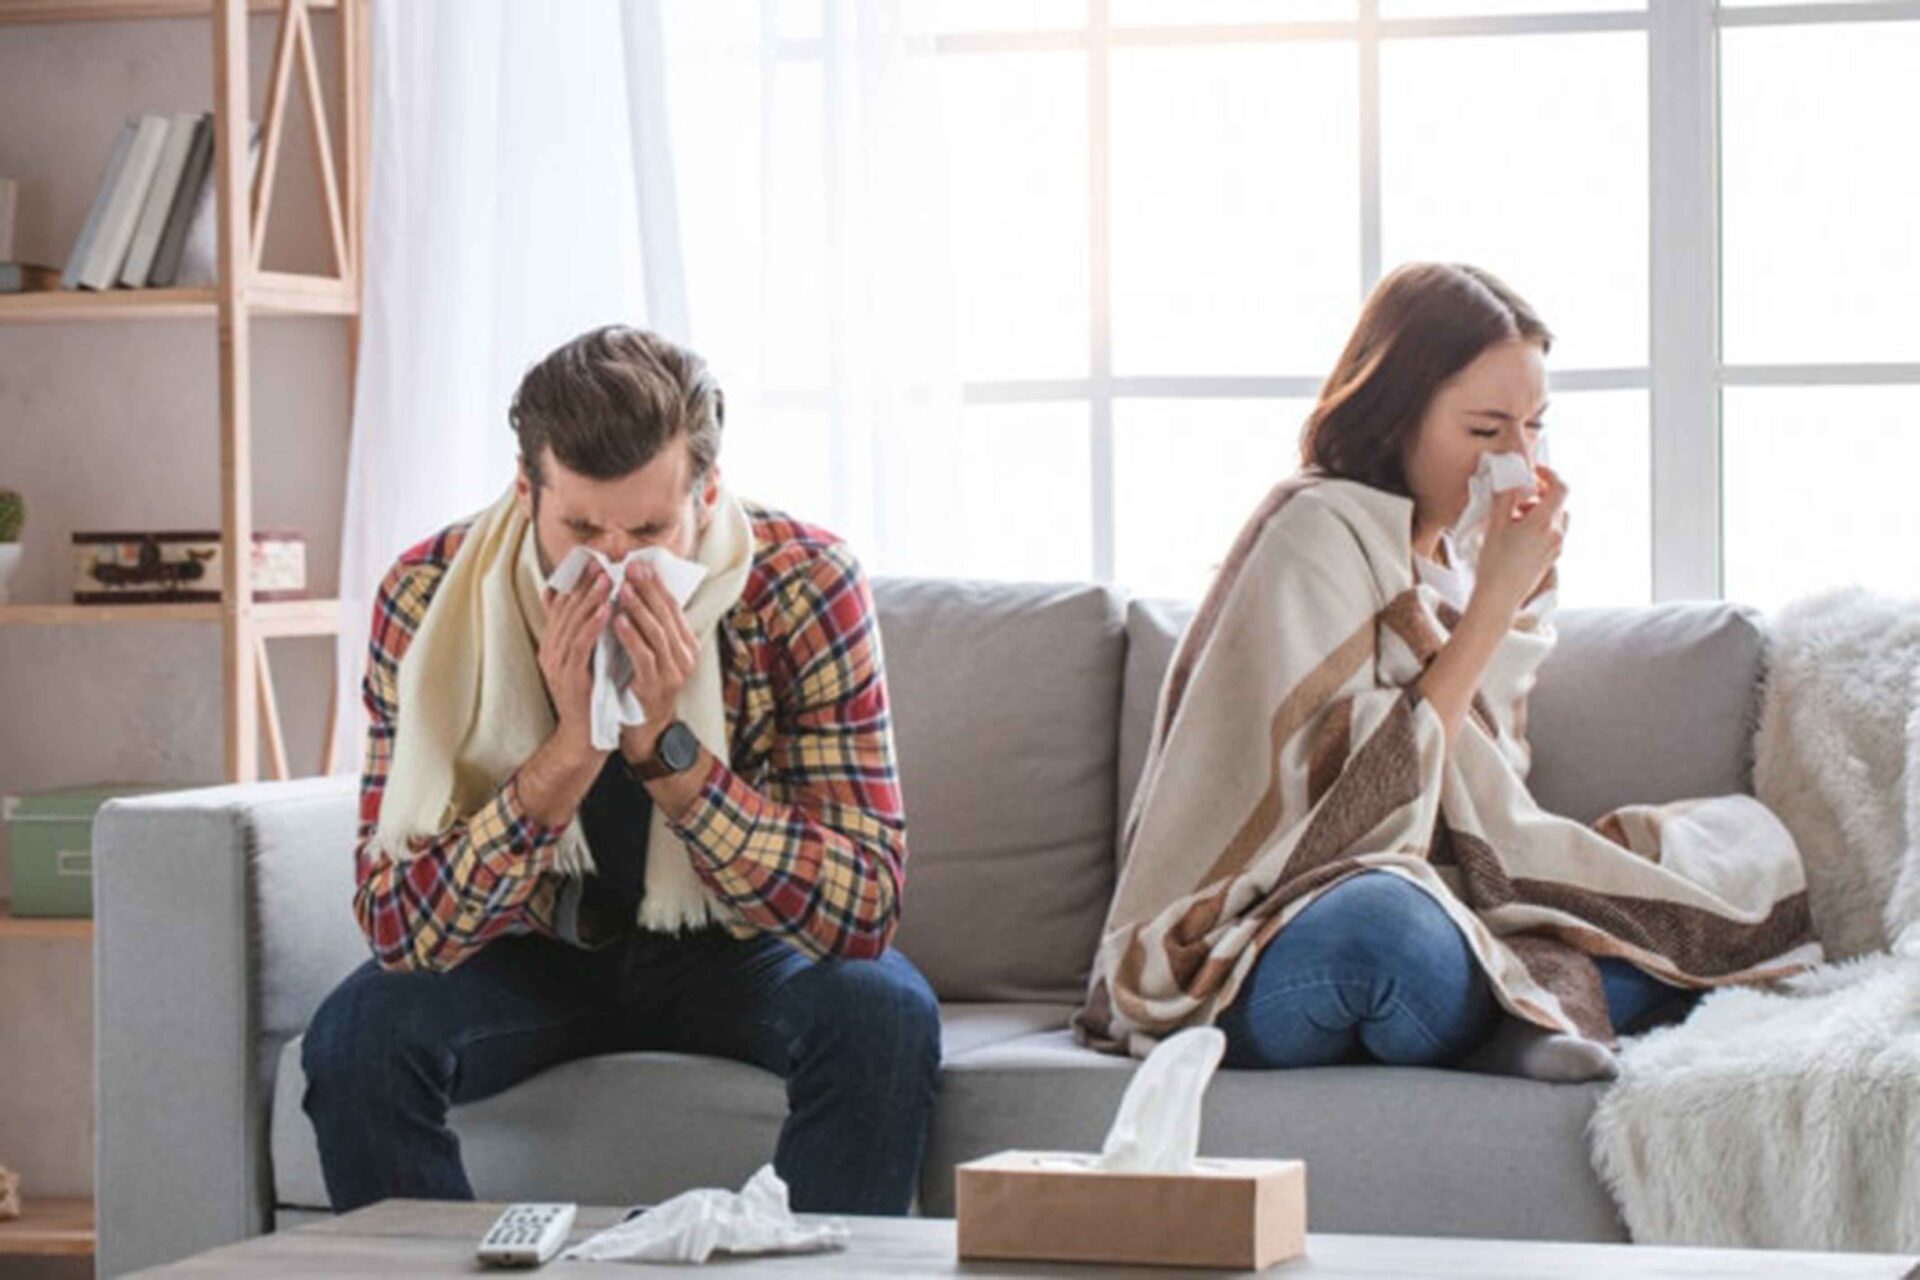 a couple sitting on the couch looks sick because of indoor air quality